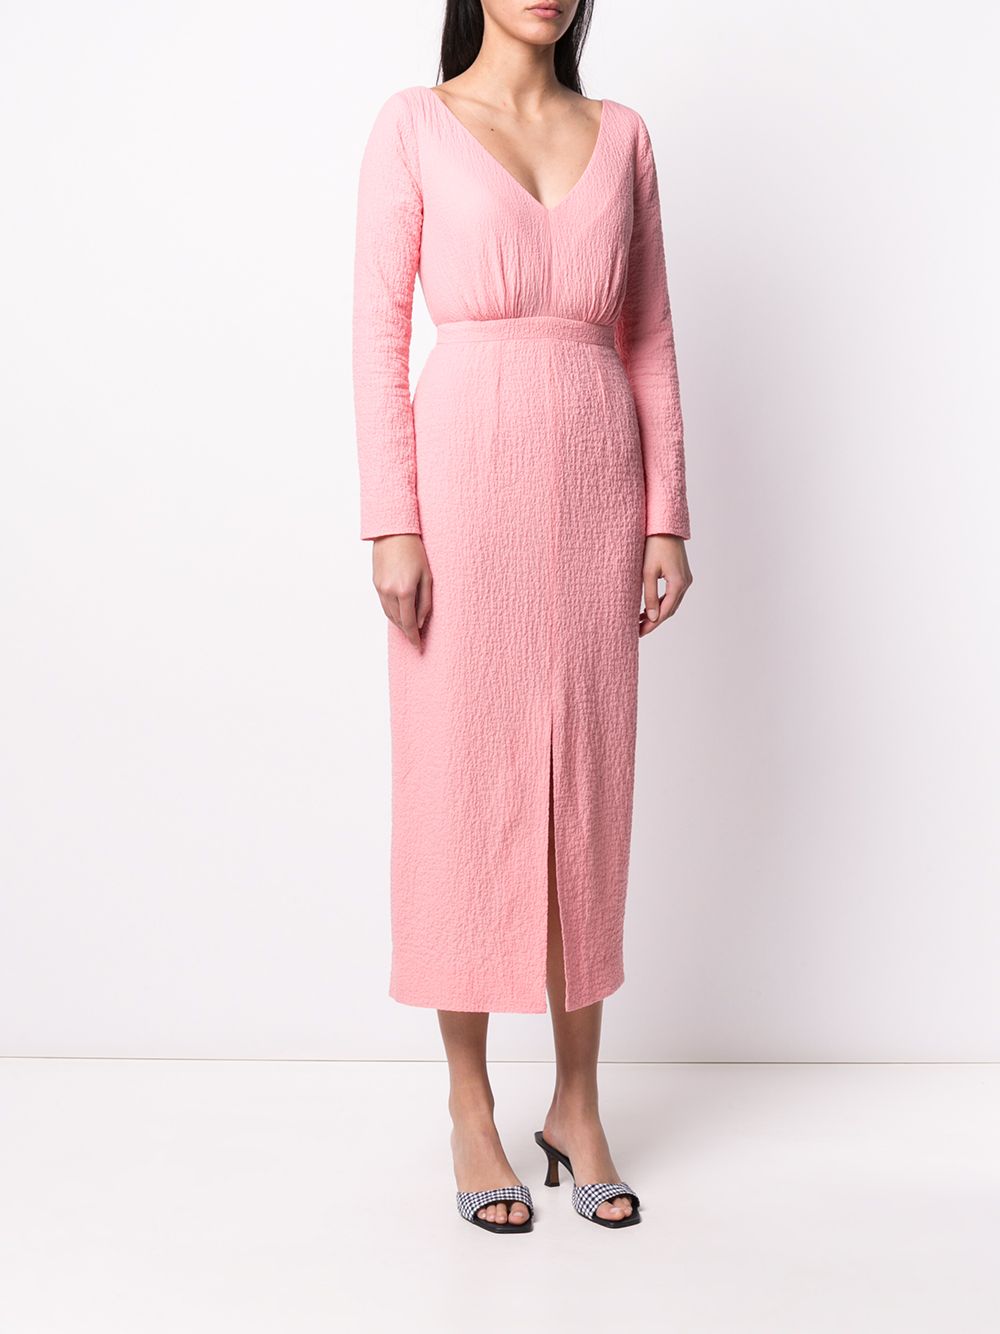 фото Emilia wickstead textured style front slit detail dress